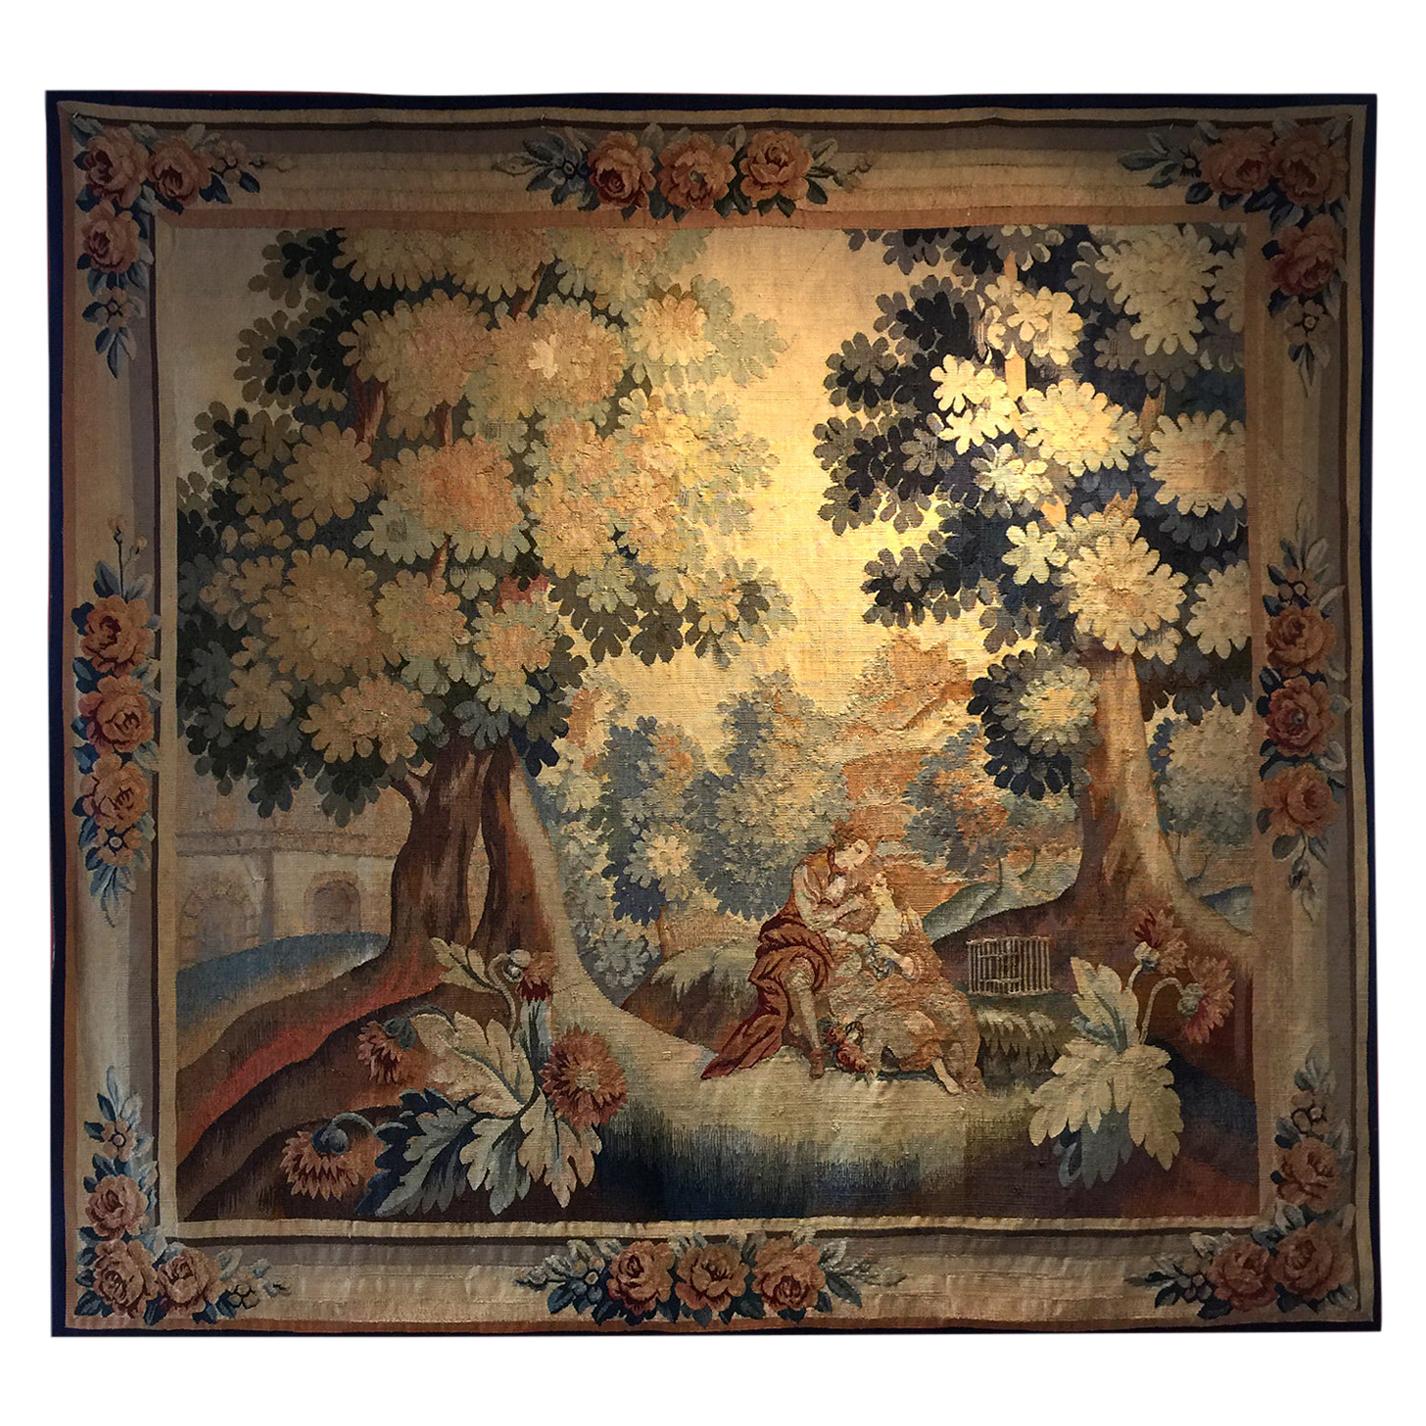 Antique Rugs, Tapestry Flemish Wall Decoration Object, Decorative Rugs For Sale